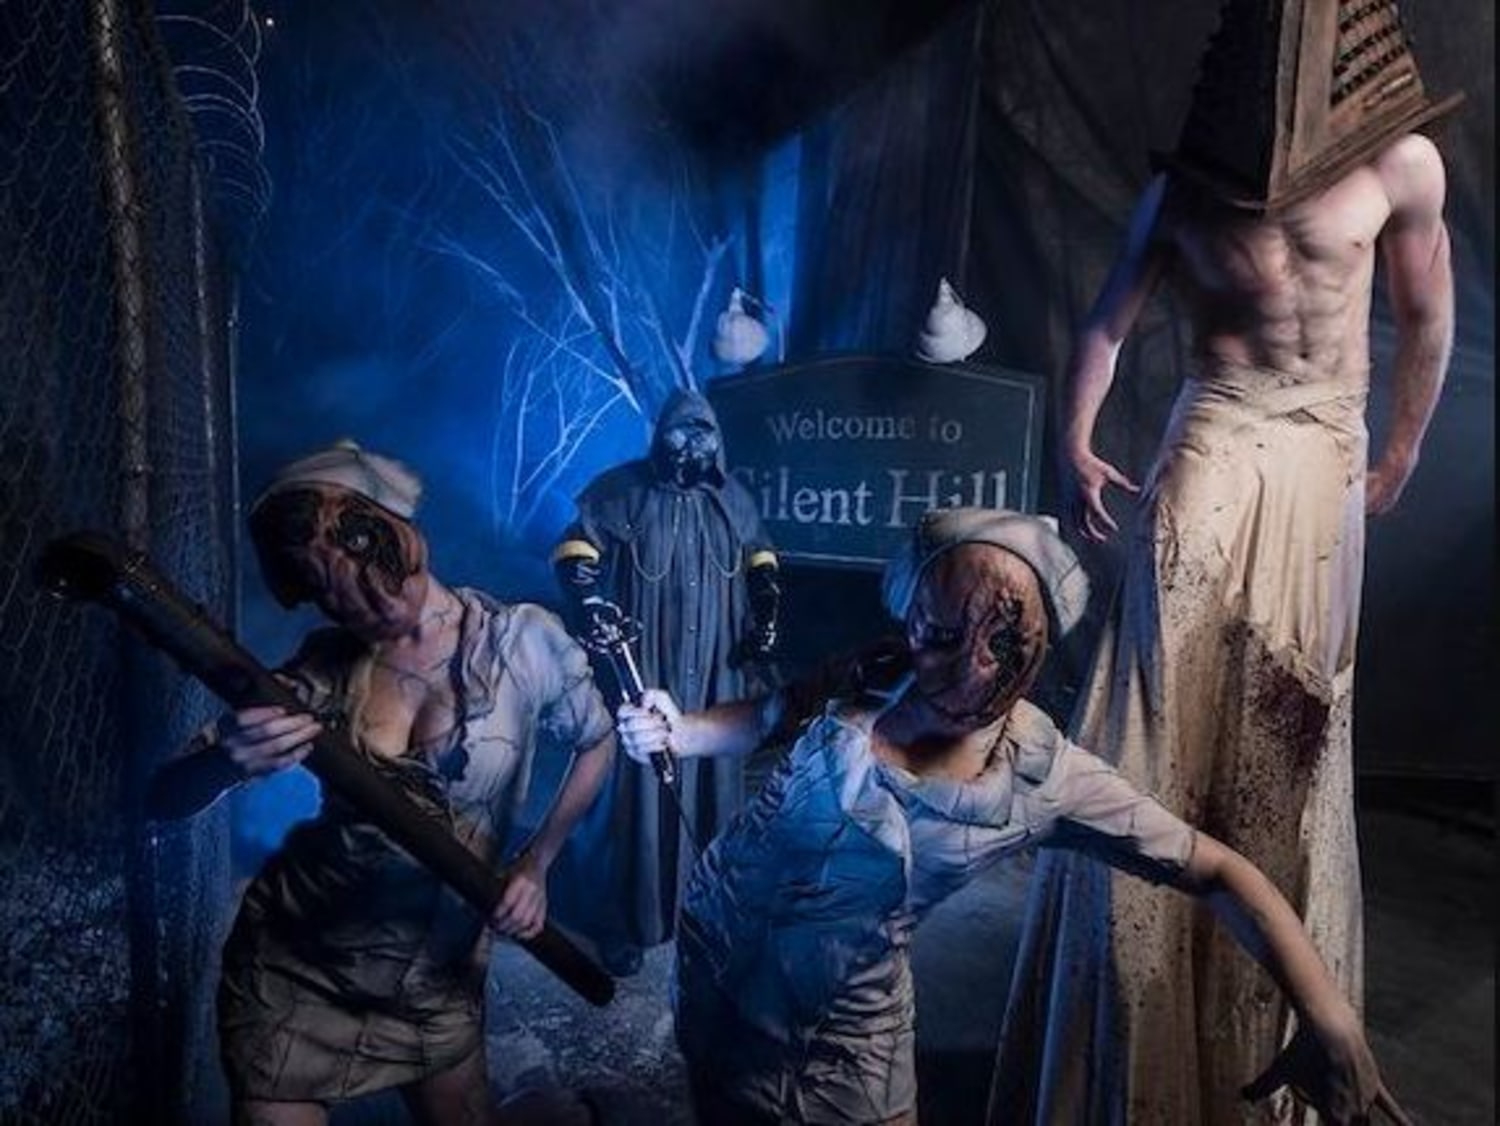 Silent Hill' screams to life as theme park attraction